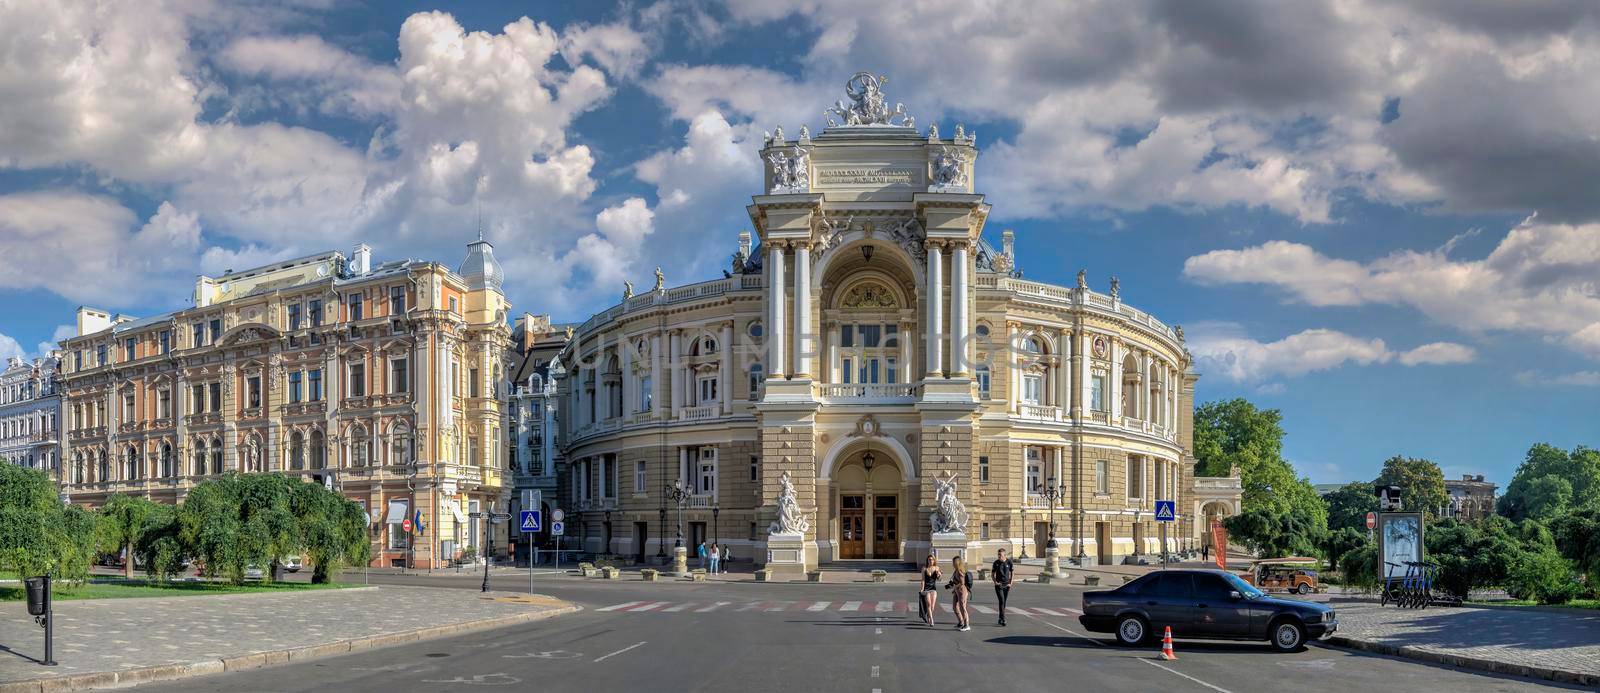 Odessa theater of Opera and Ballet in Ukraine by Multipedia